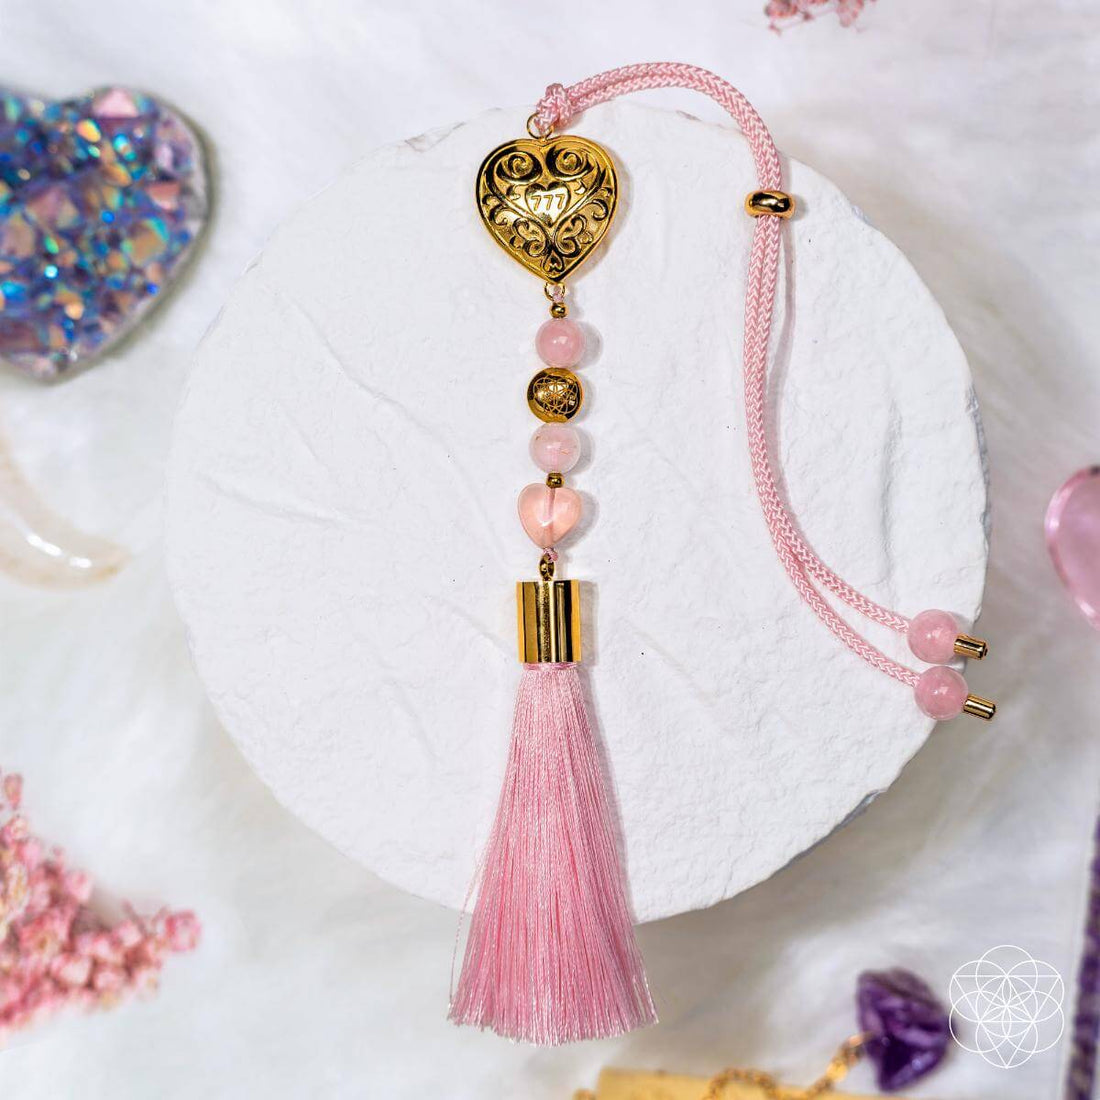 Car Guardian - ‘You Are Loved’ Heart Charm Tassel